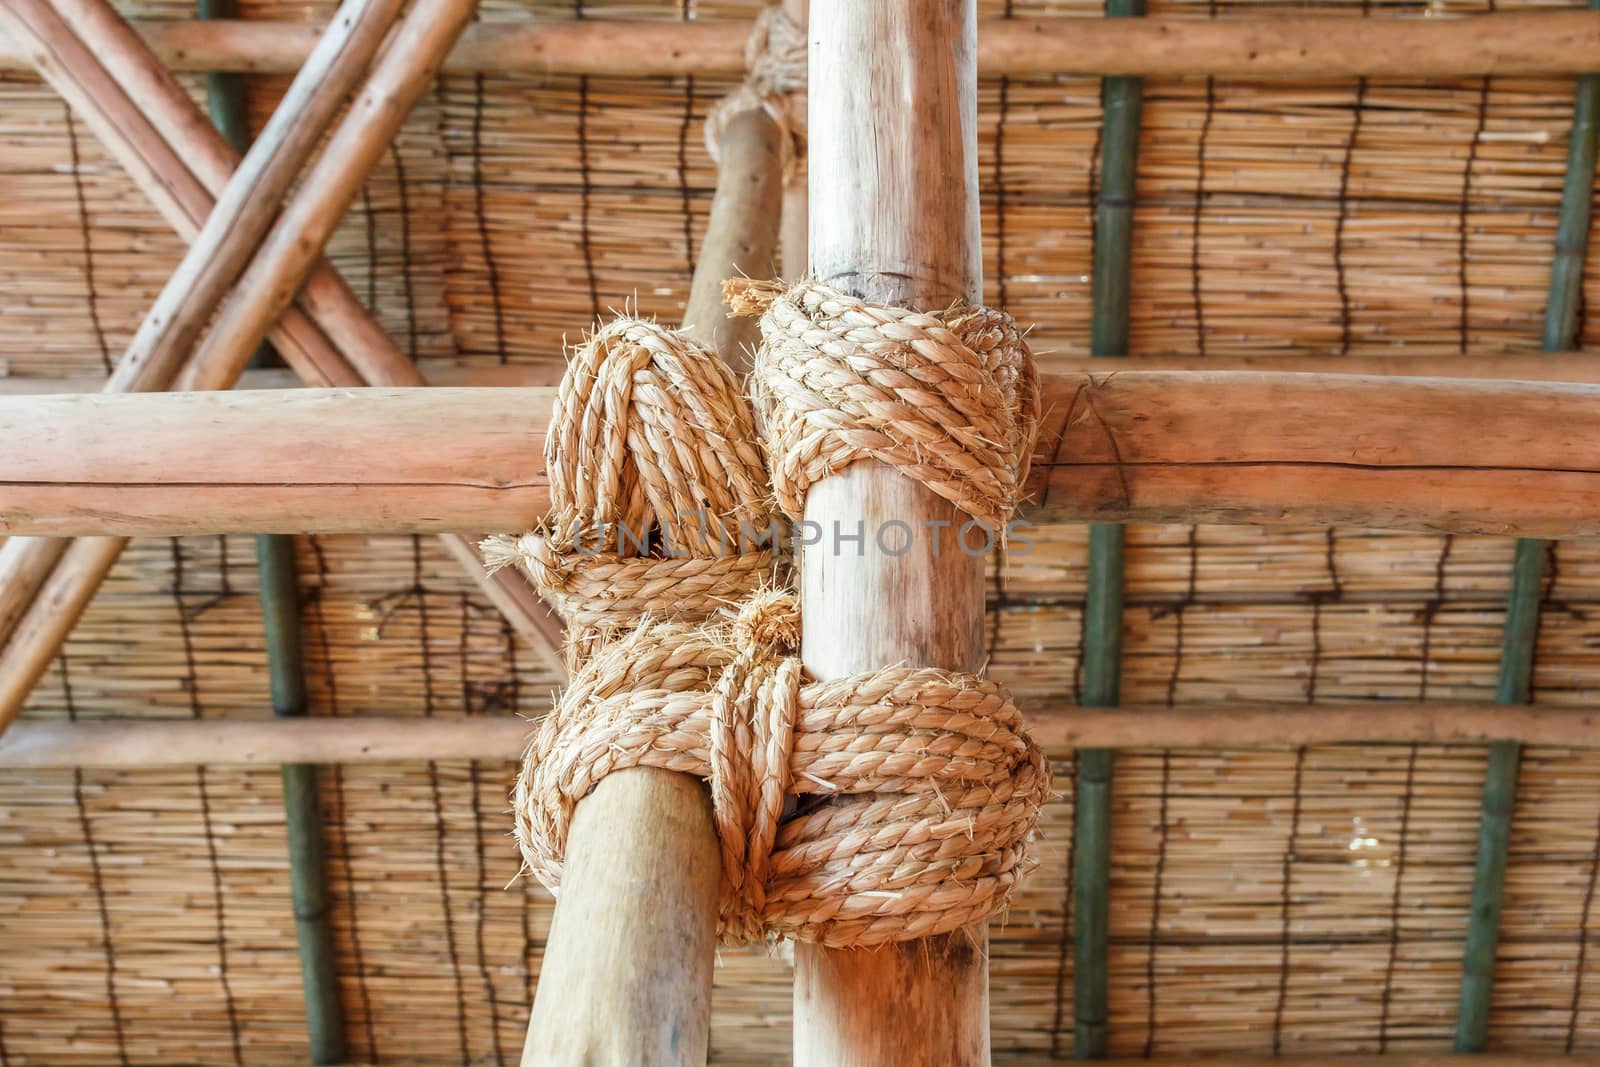 Rope tied wood together. by stigmatize